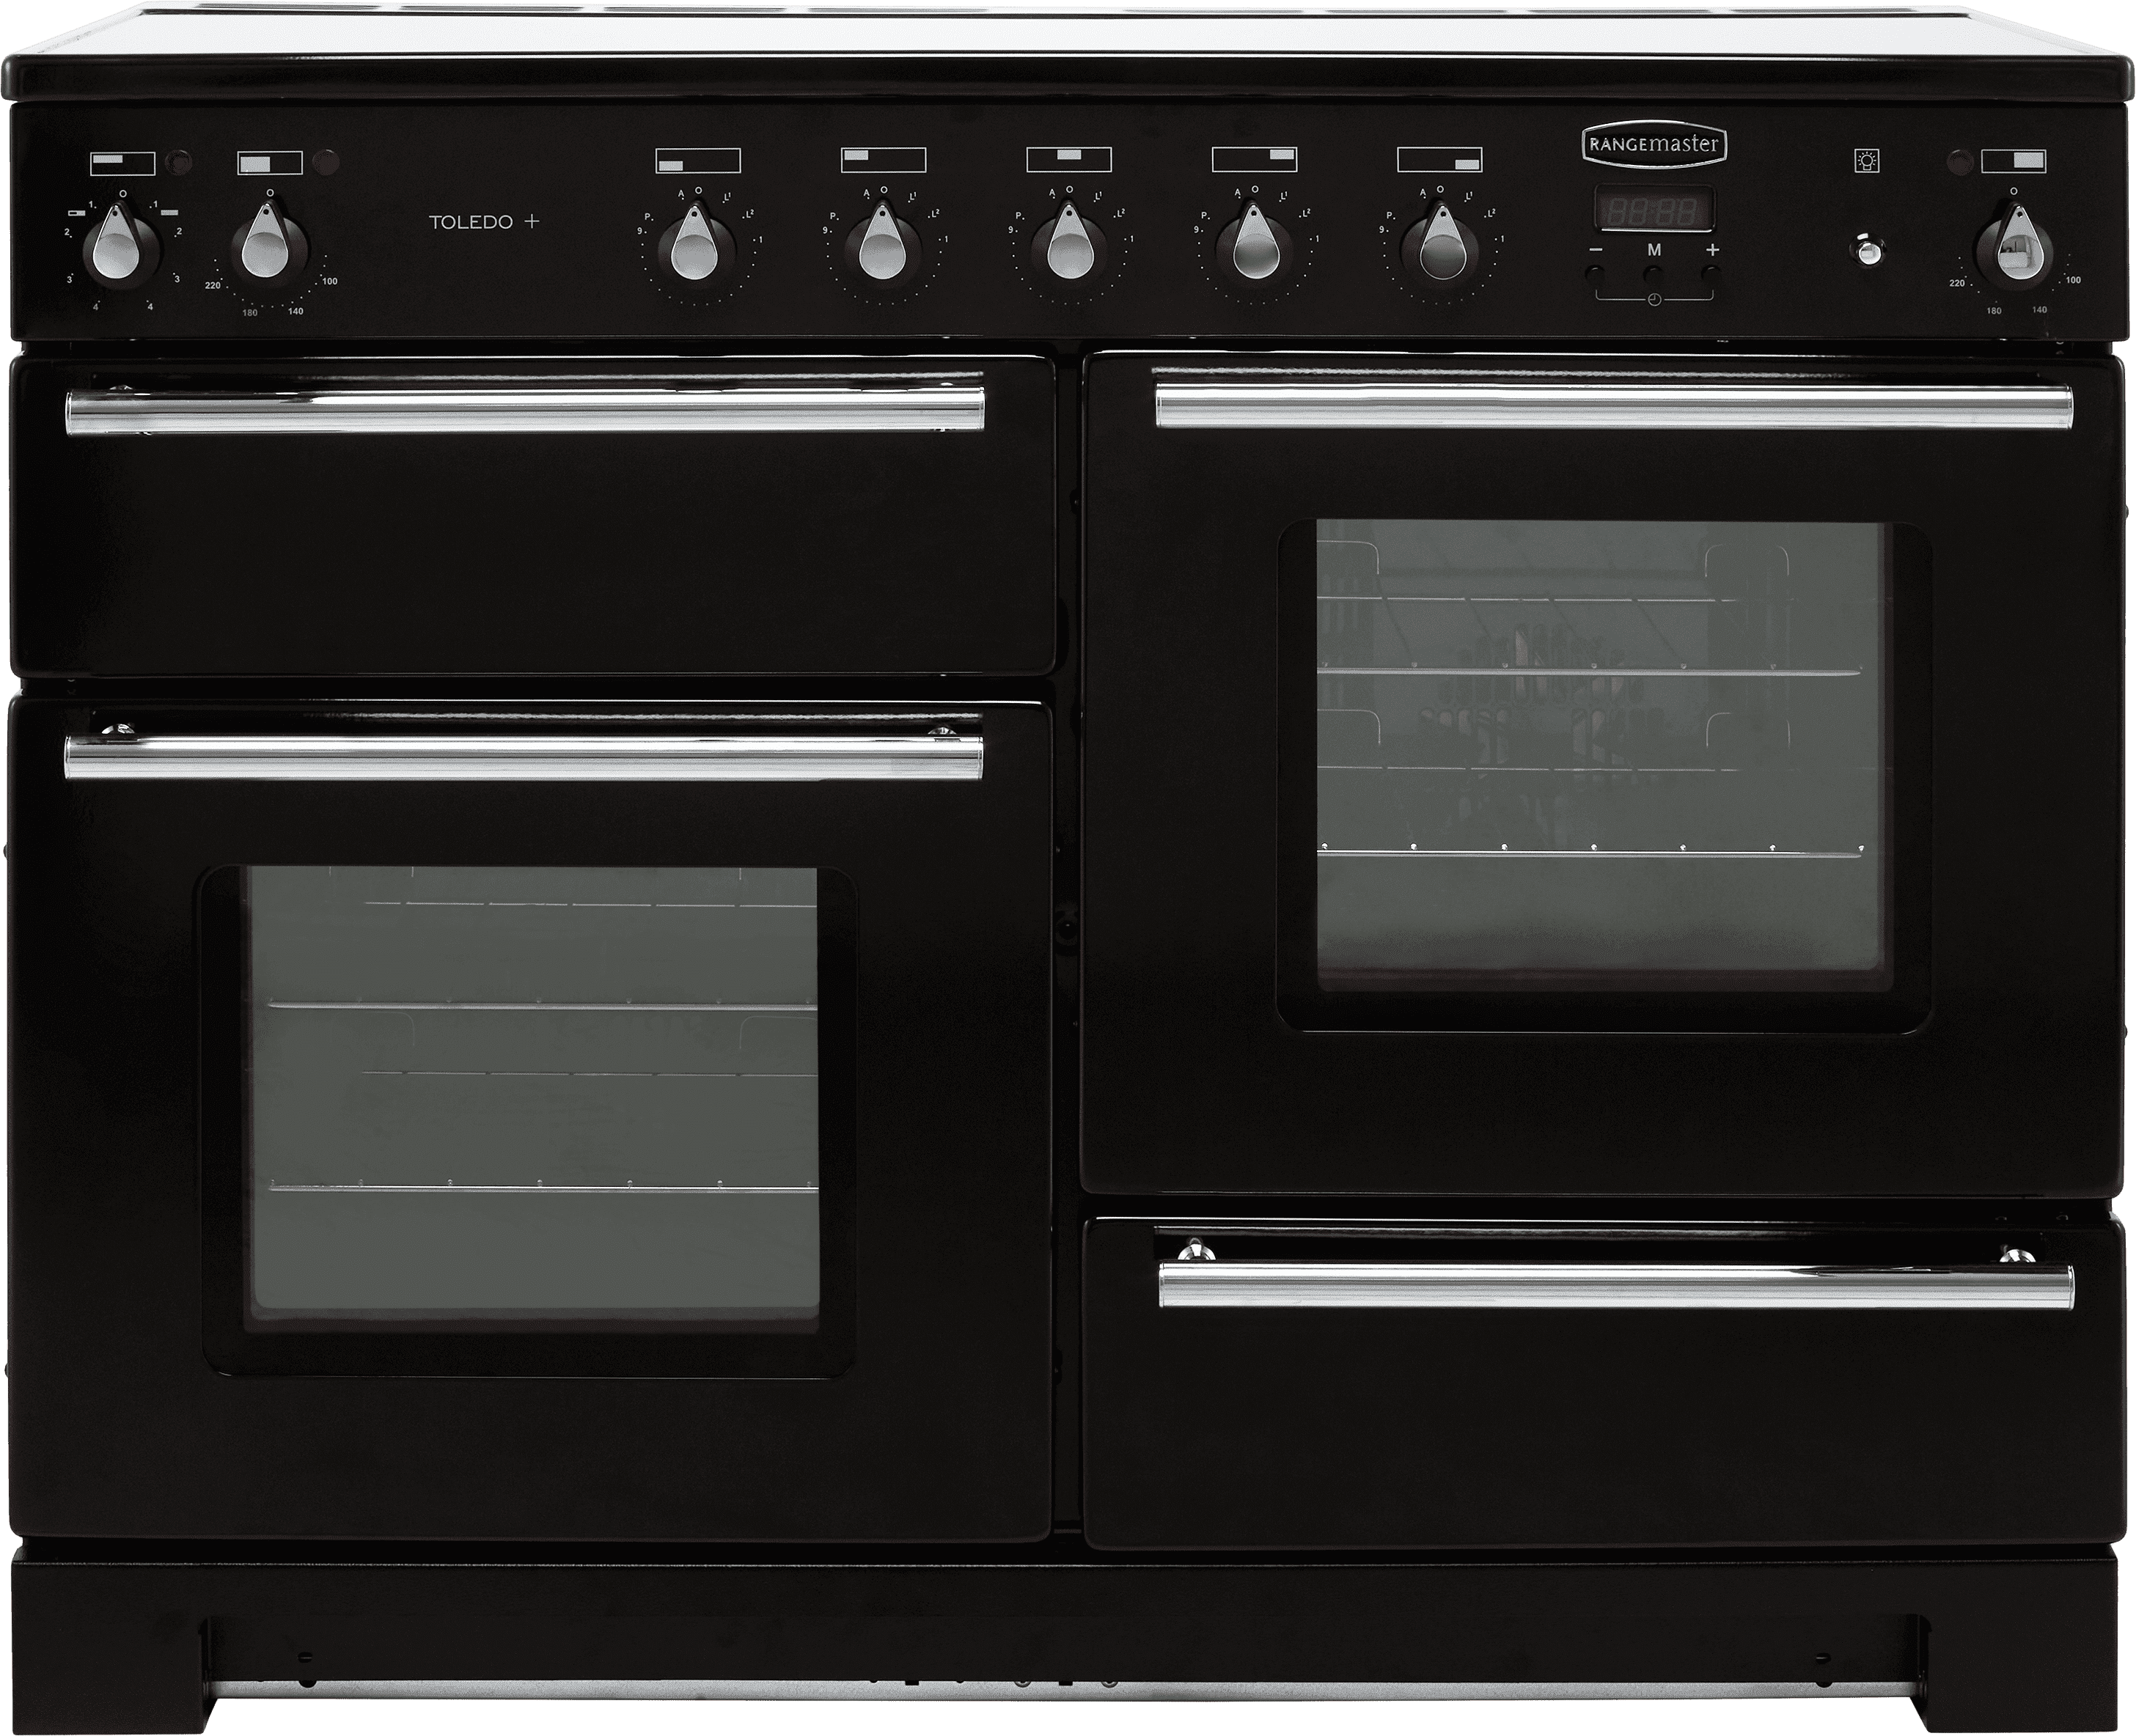 Rangemaster Toledo + TOLP110EIGB/C 110cm Electric Range Cooker with Induction Hob - Black - A/A Rated, Black